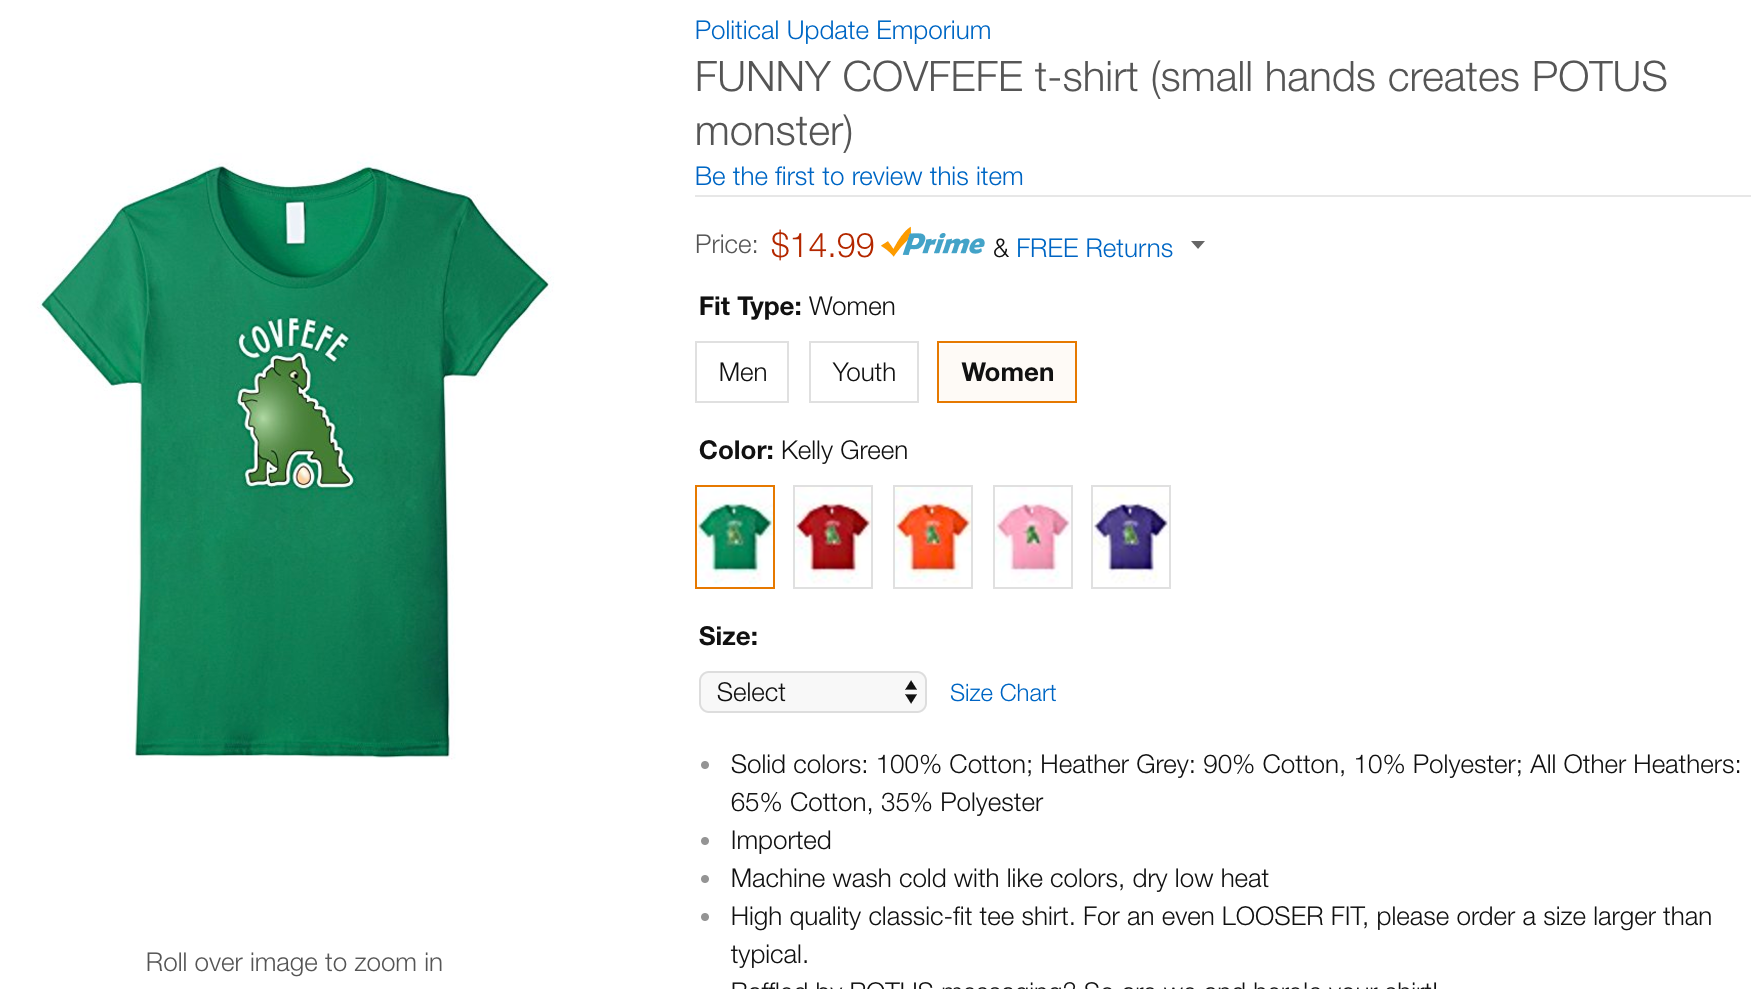 Be The Saddest Guy In The Office With Amazon’s Embarrassing ‘Covfefe’ Swag